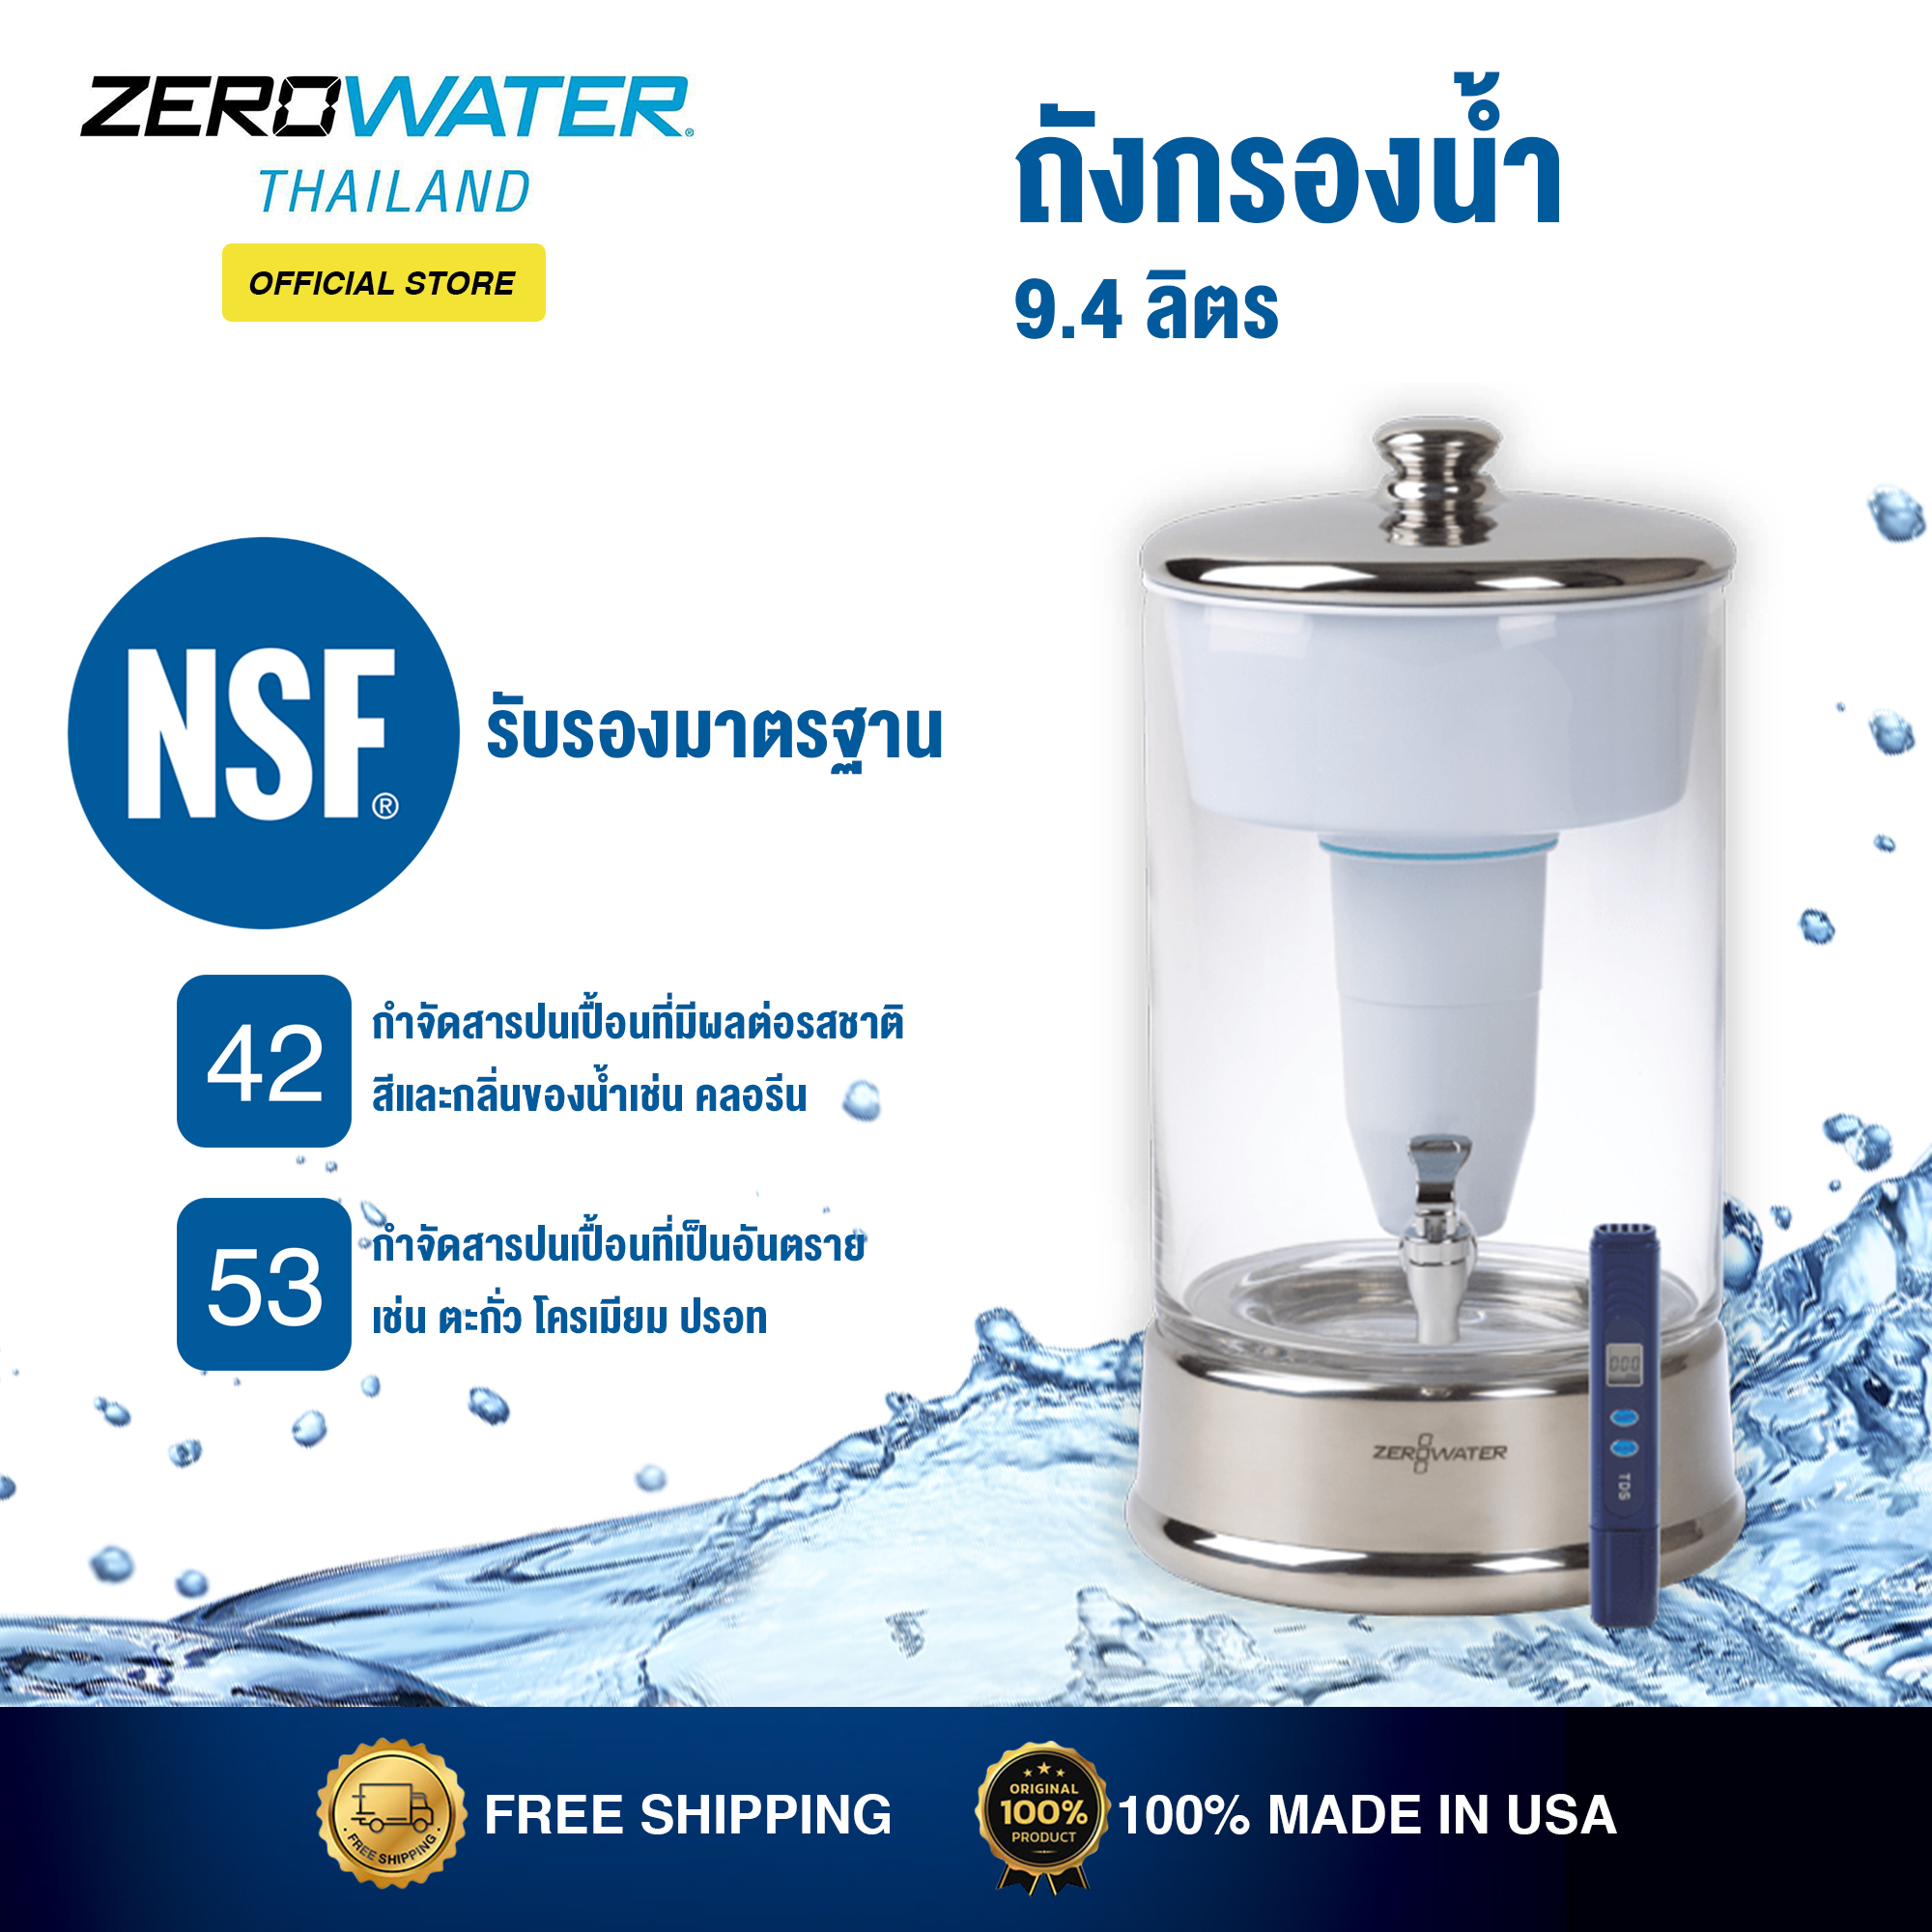 ZeroWater® Glass Water Filter Dispenser 9.4 Litres from America. Ready-Pour® technology. Removes all suspended solids for purest tasting water as drinking water bottle. Certified NFS 42&53 (Free Shipping/TDS meter/Spigot)